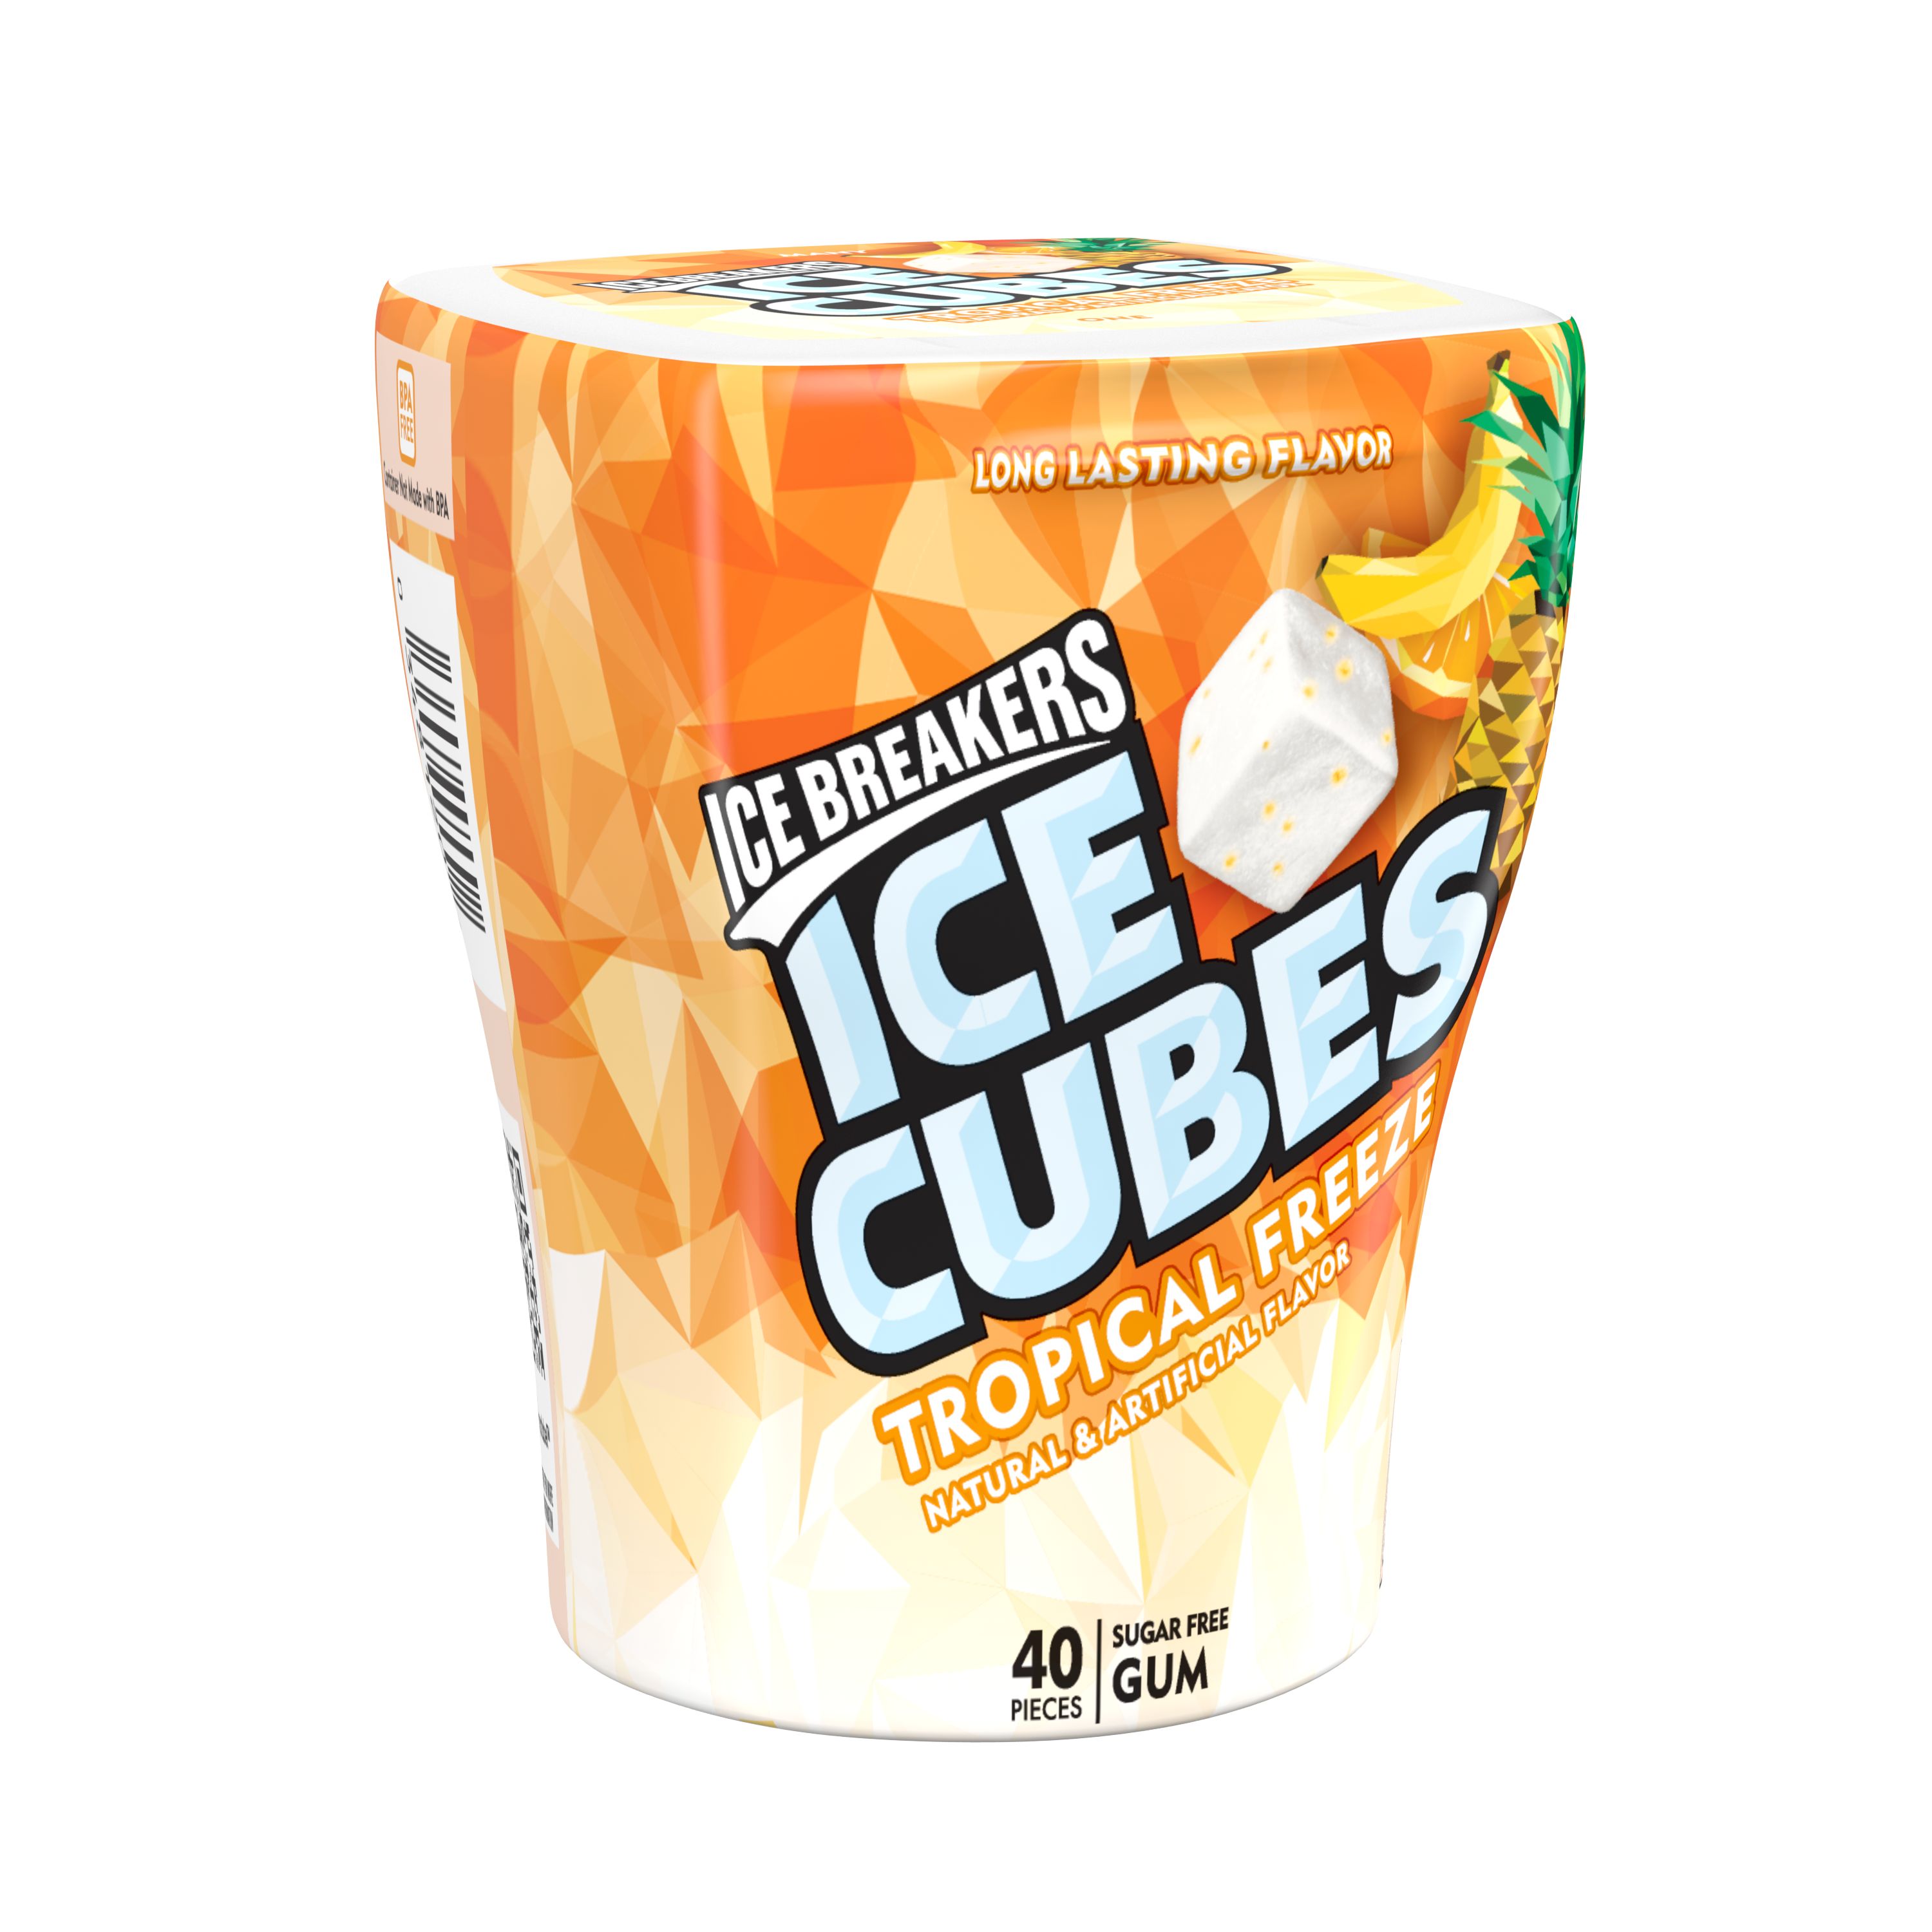 Ice Breakers Ice Cubes, Tropical Freeze, Sugar Free Gum, 40 Pieces, 3.24 OZ